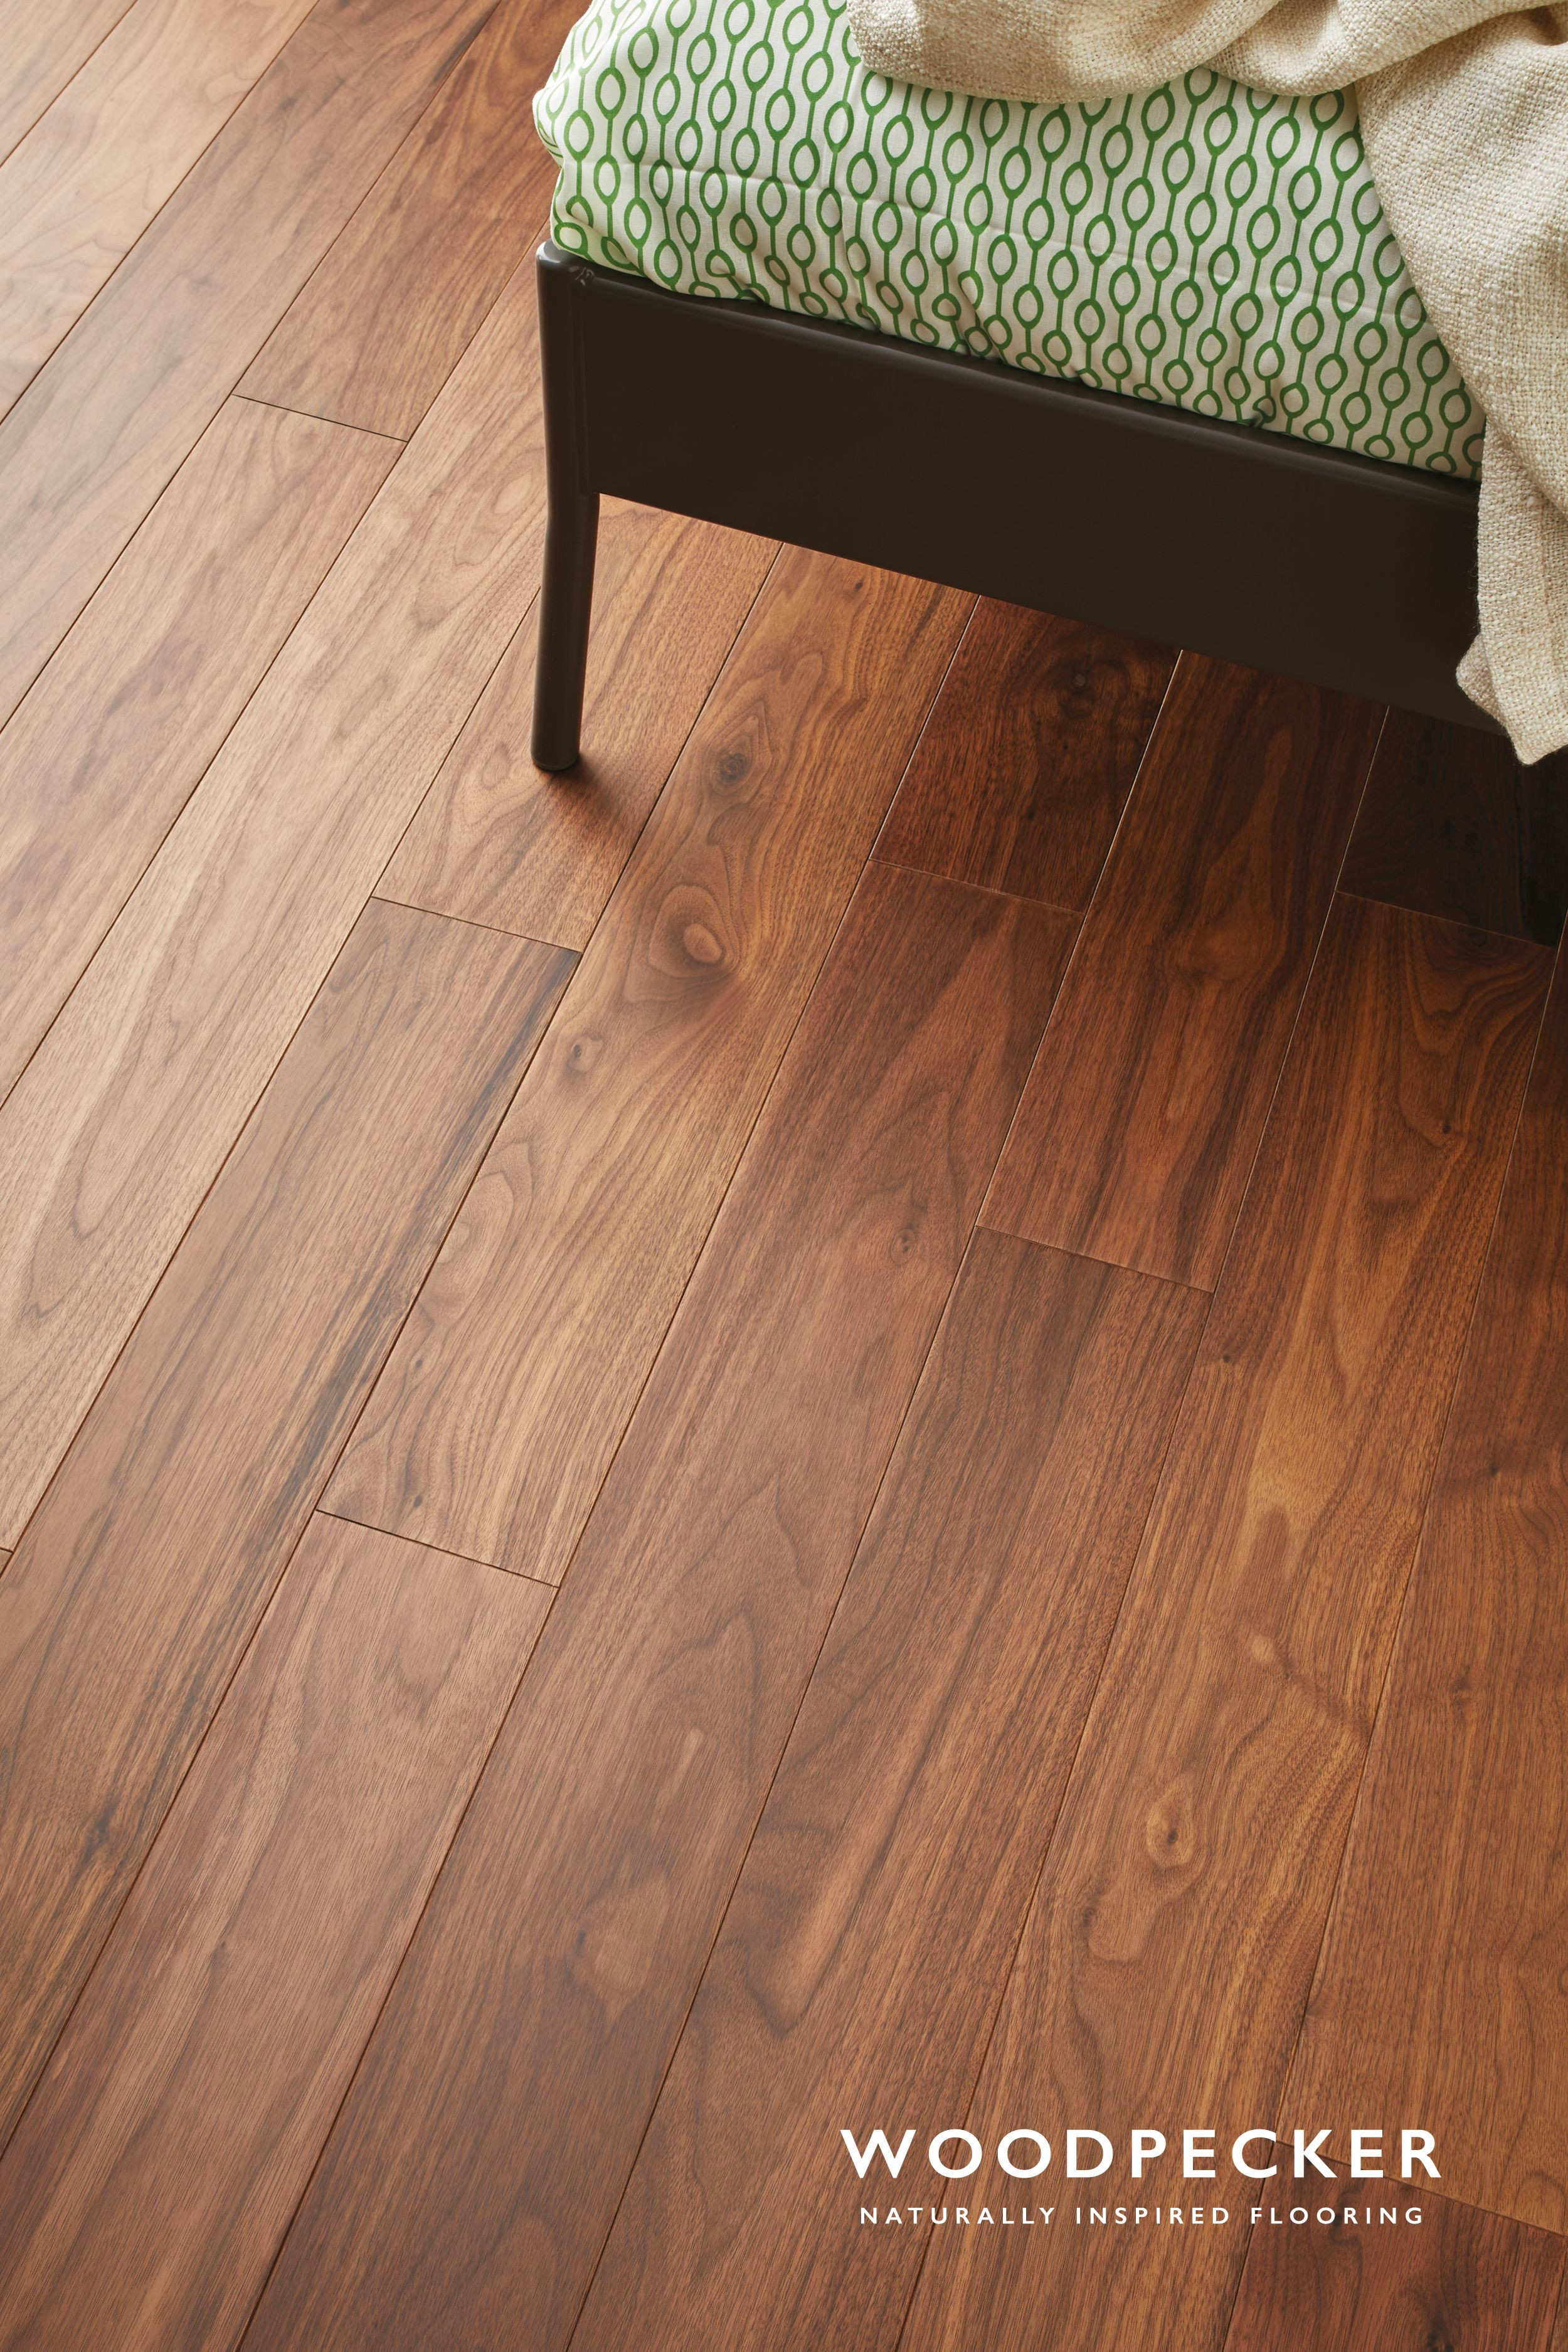 19 attractive Laminate or Engineered Hardwood Flooring which is Better 2024 free download laminate or engineered hardwood flooring which is better of raglan walnut exotic engineered wood and wood flooring throughout walnut flooring is exotic and exciting with wide flowing grain p